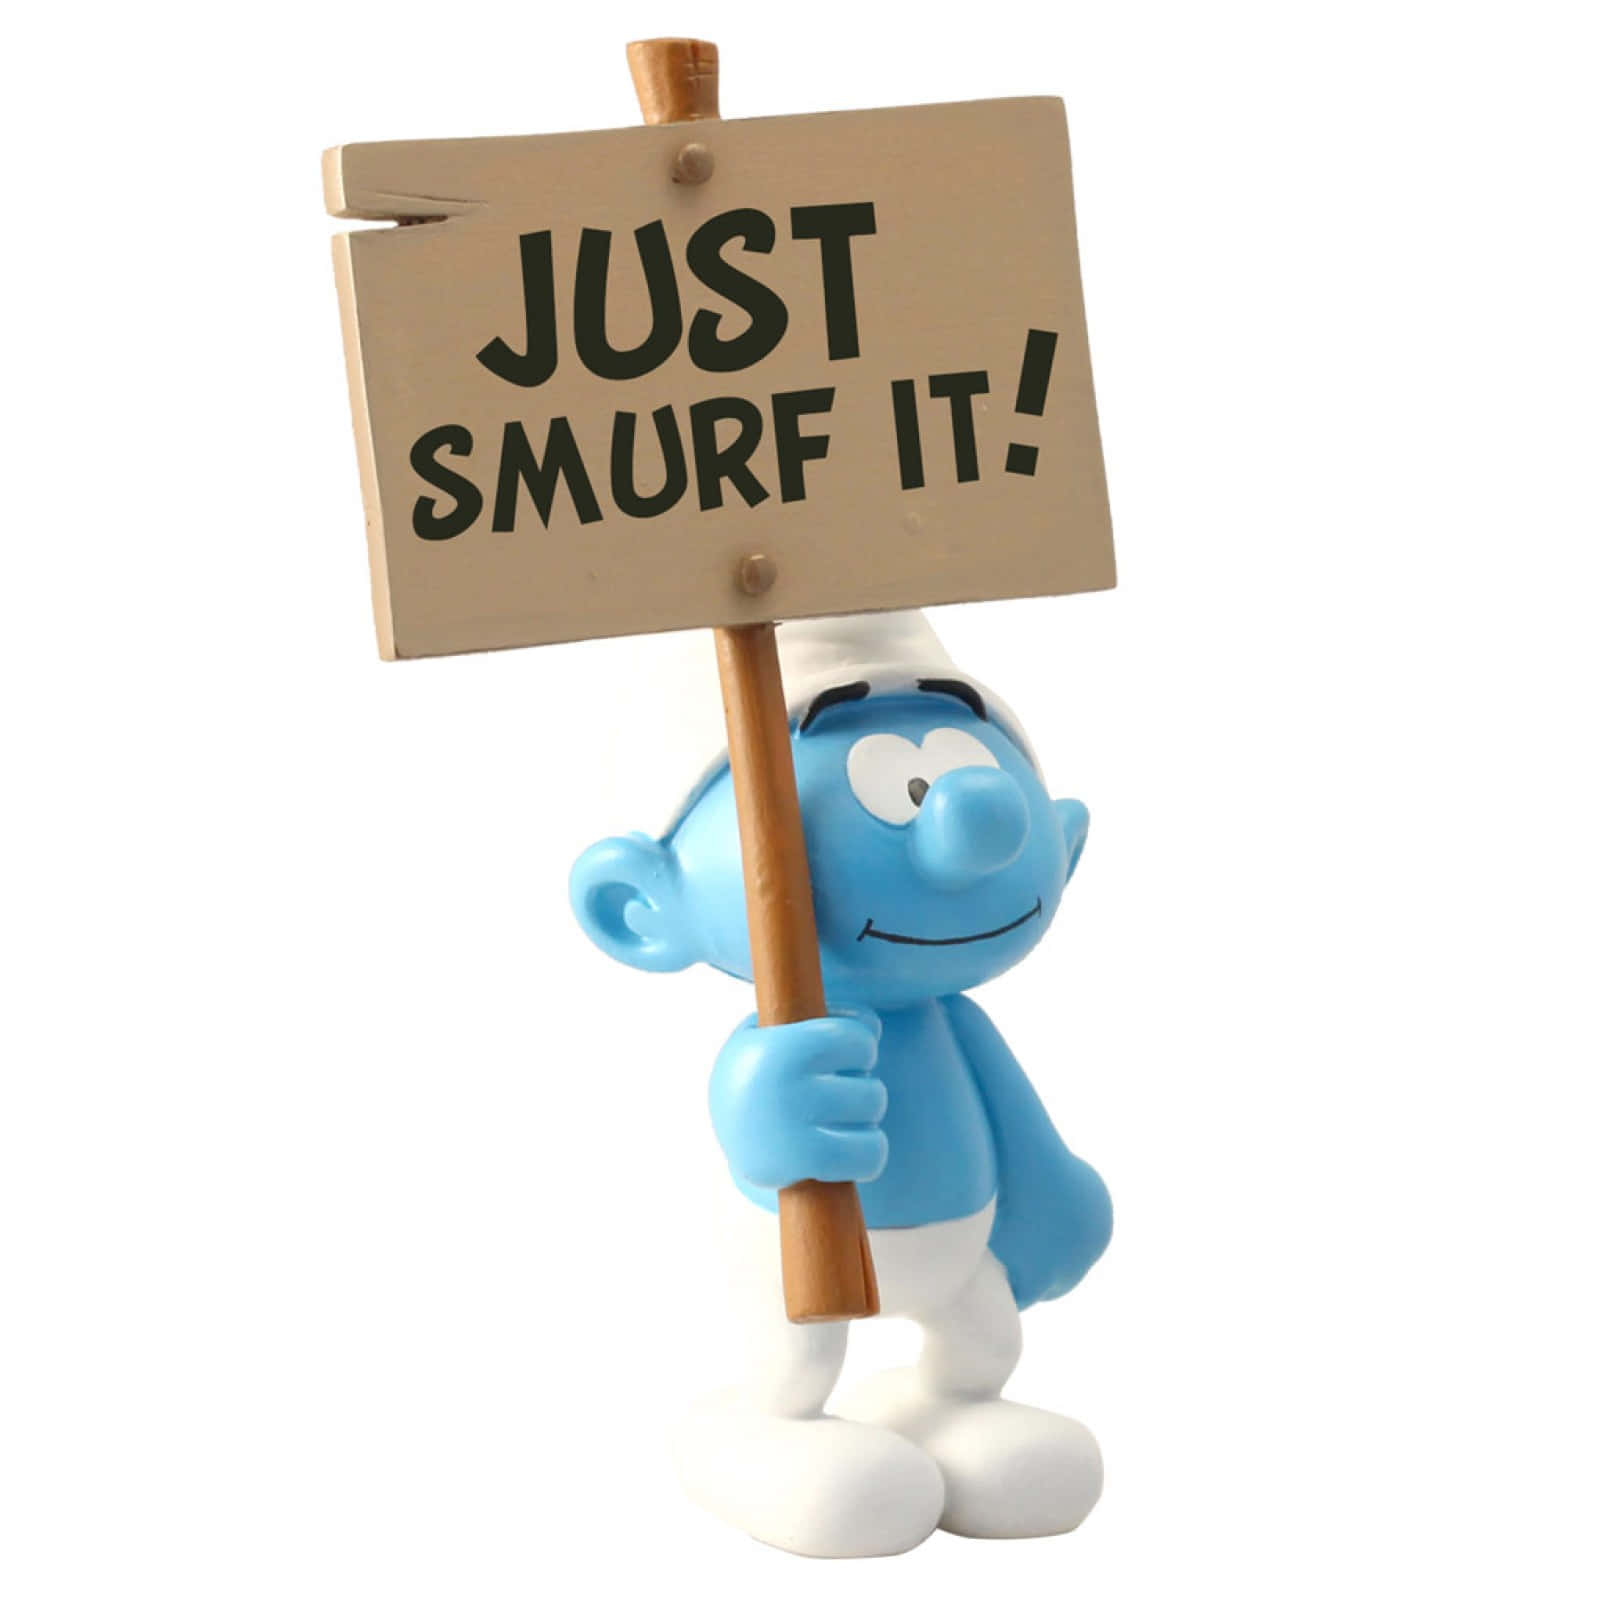 "Welcome To Smurf Village!"